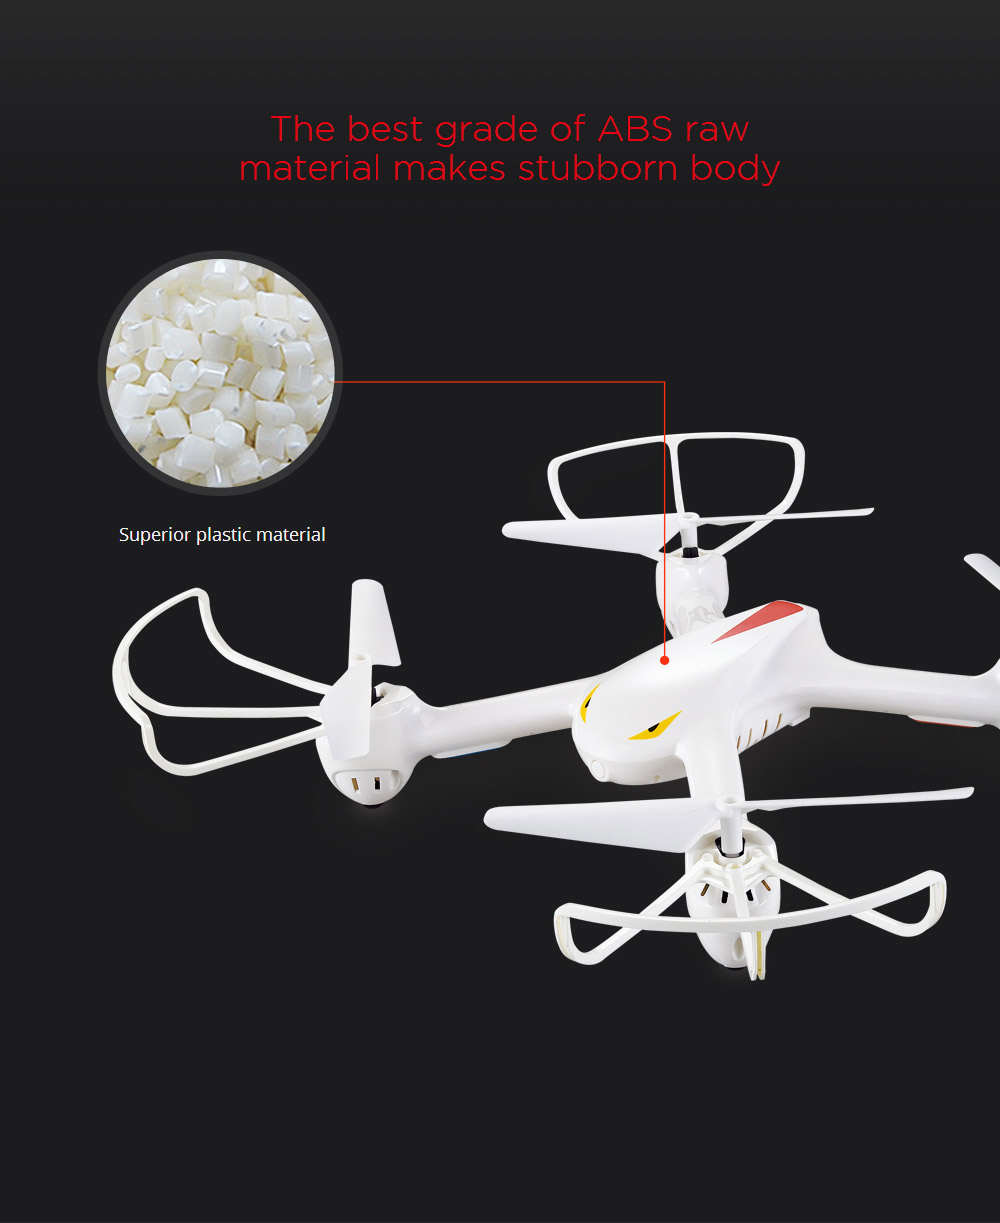 MJX X708 Cyclone 2.4G 6Axis Gyro RC Quadcopter with 3D Flips Headless Mode RTF - White